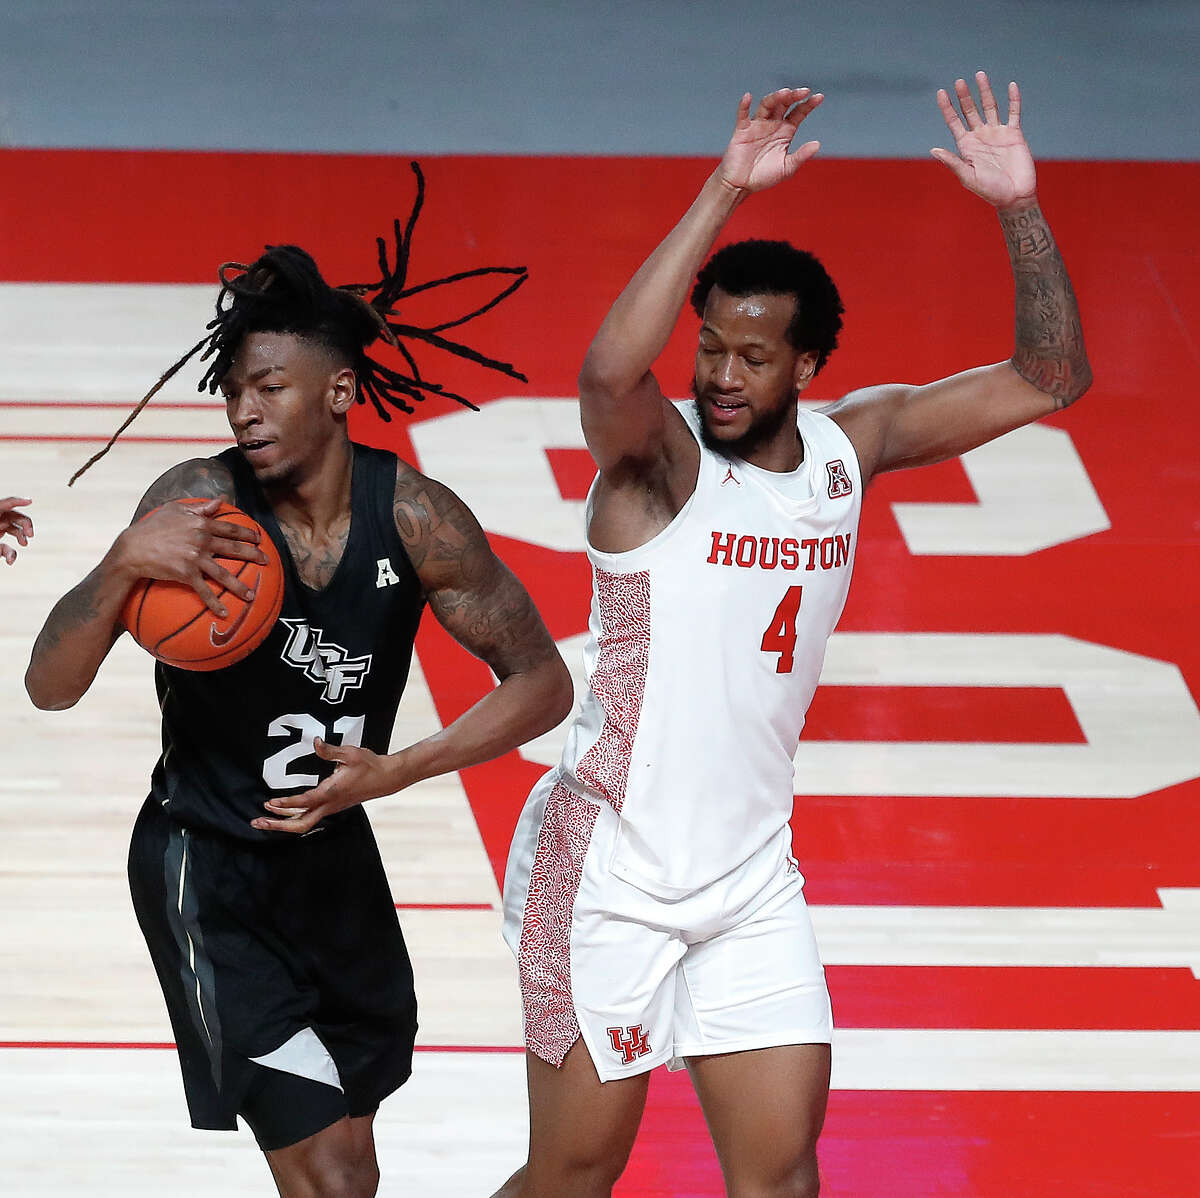 UCF Knights forward C.J. Walker (21) grabs the rebound from Houston Cougars forward Justin Gorham (4) during the second half of a men’s NCAA basketball game at the Fertitta Center, in Houston, Sunday, Jan. 17, 2021.